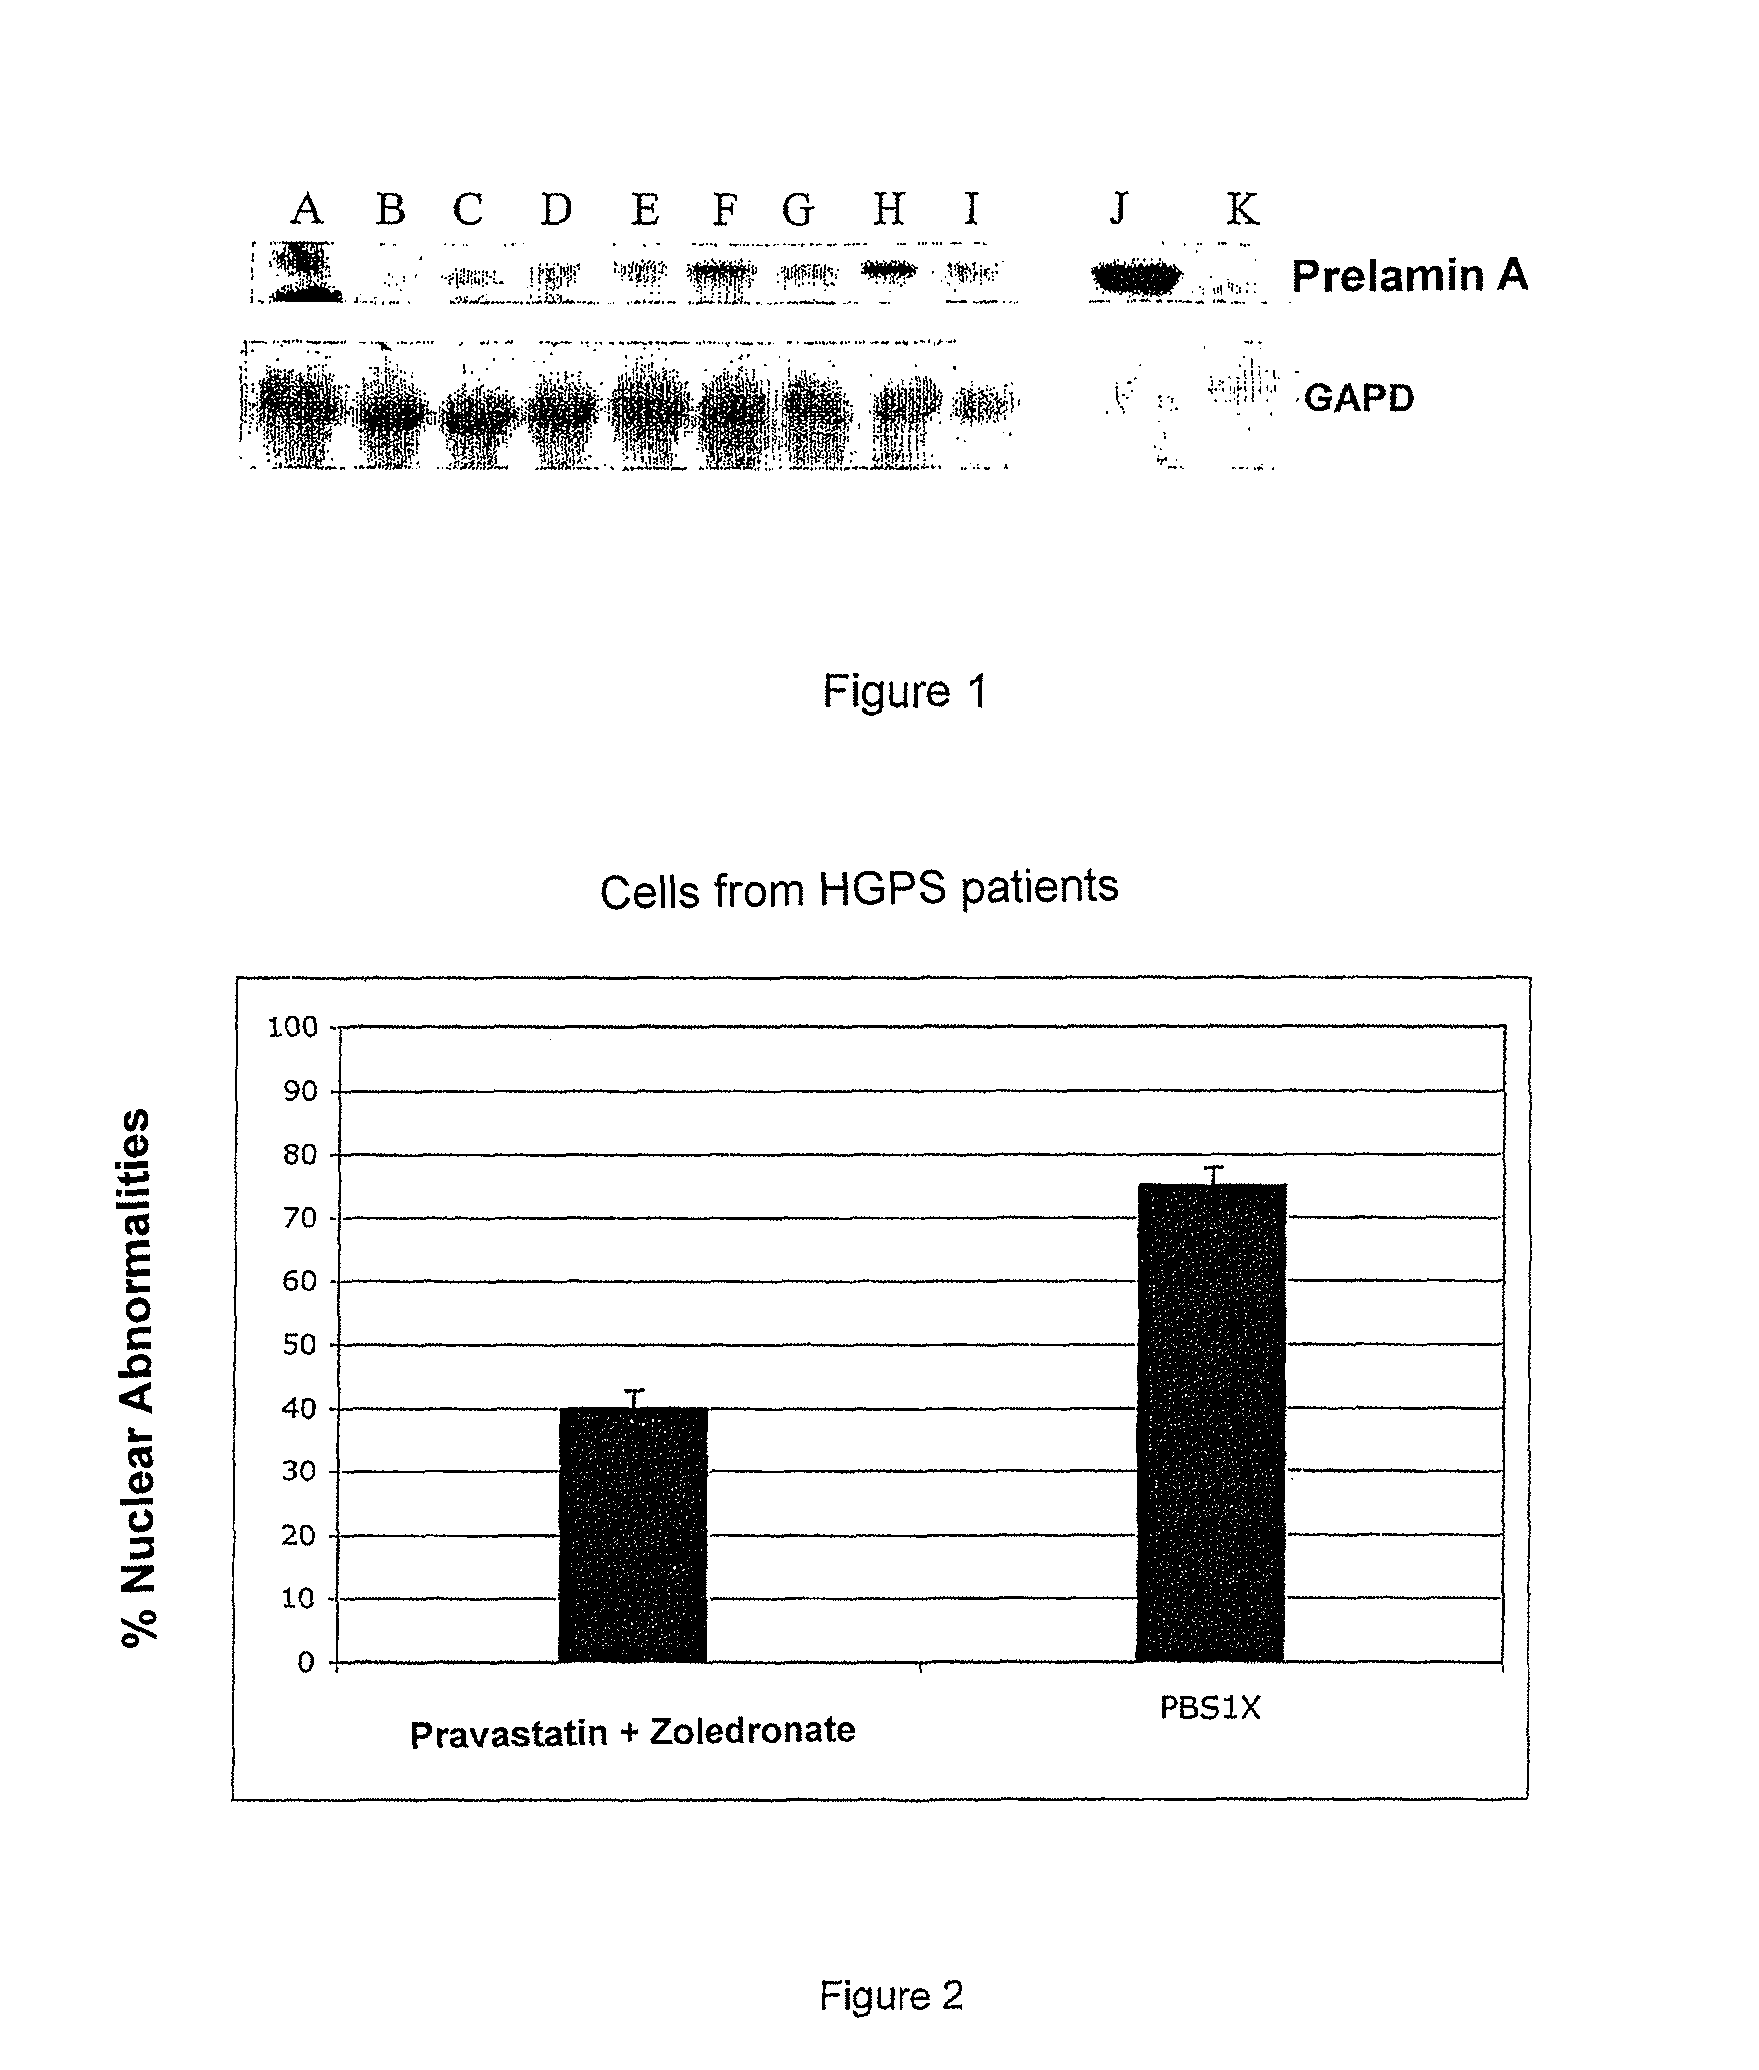 HMG-CoA reductase and farnesyl-pyrophosphate synthase inhibitors for the treatment of conditions related to prenylated proteins in cells